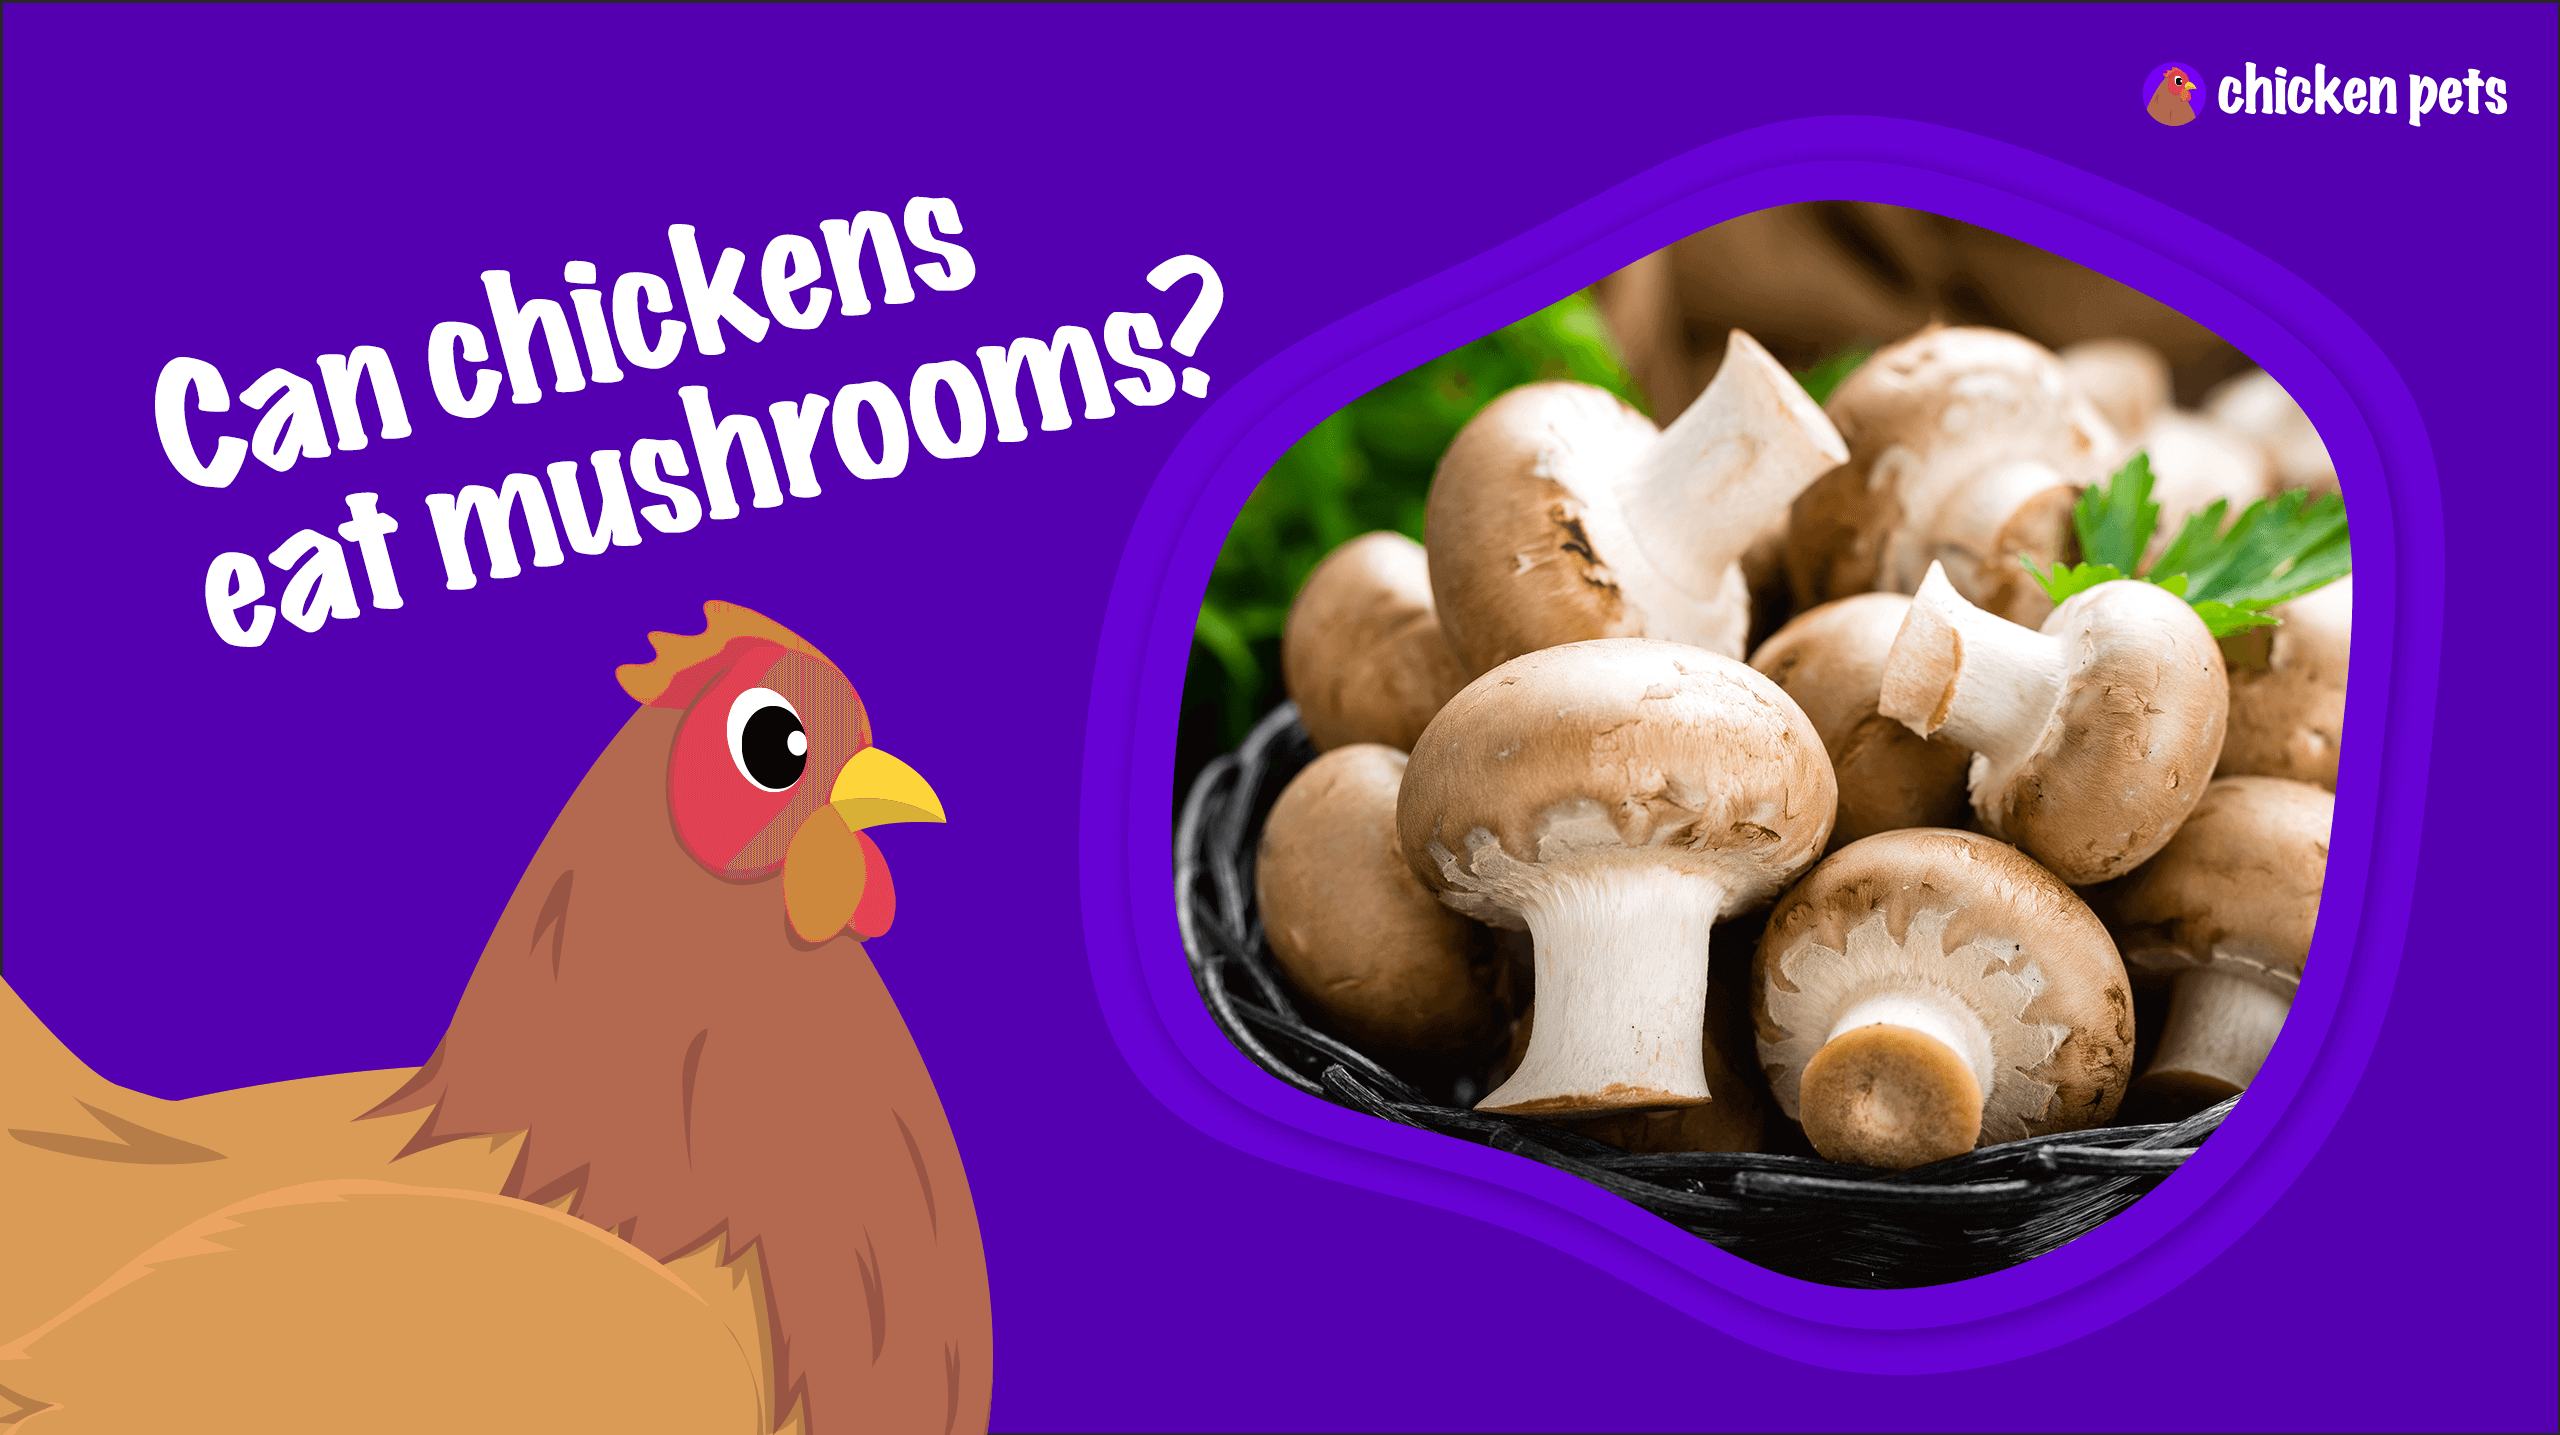 can chickens eat mushrooms